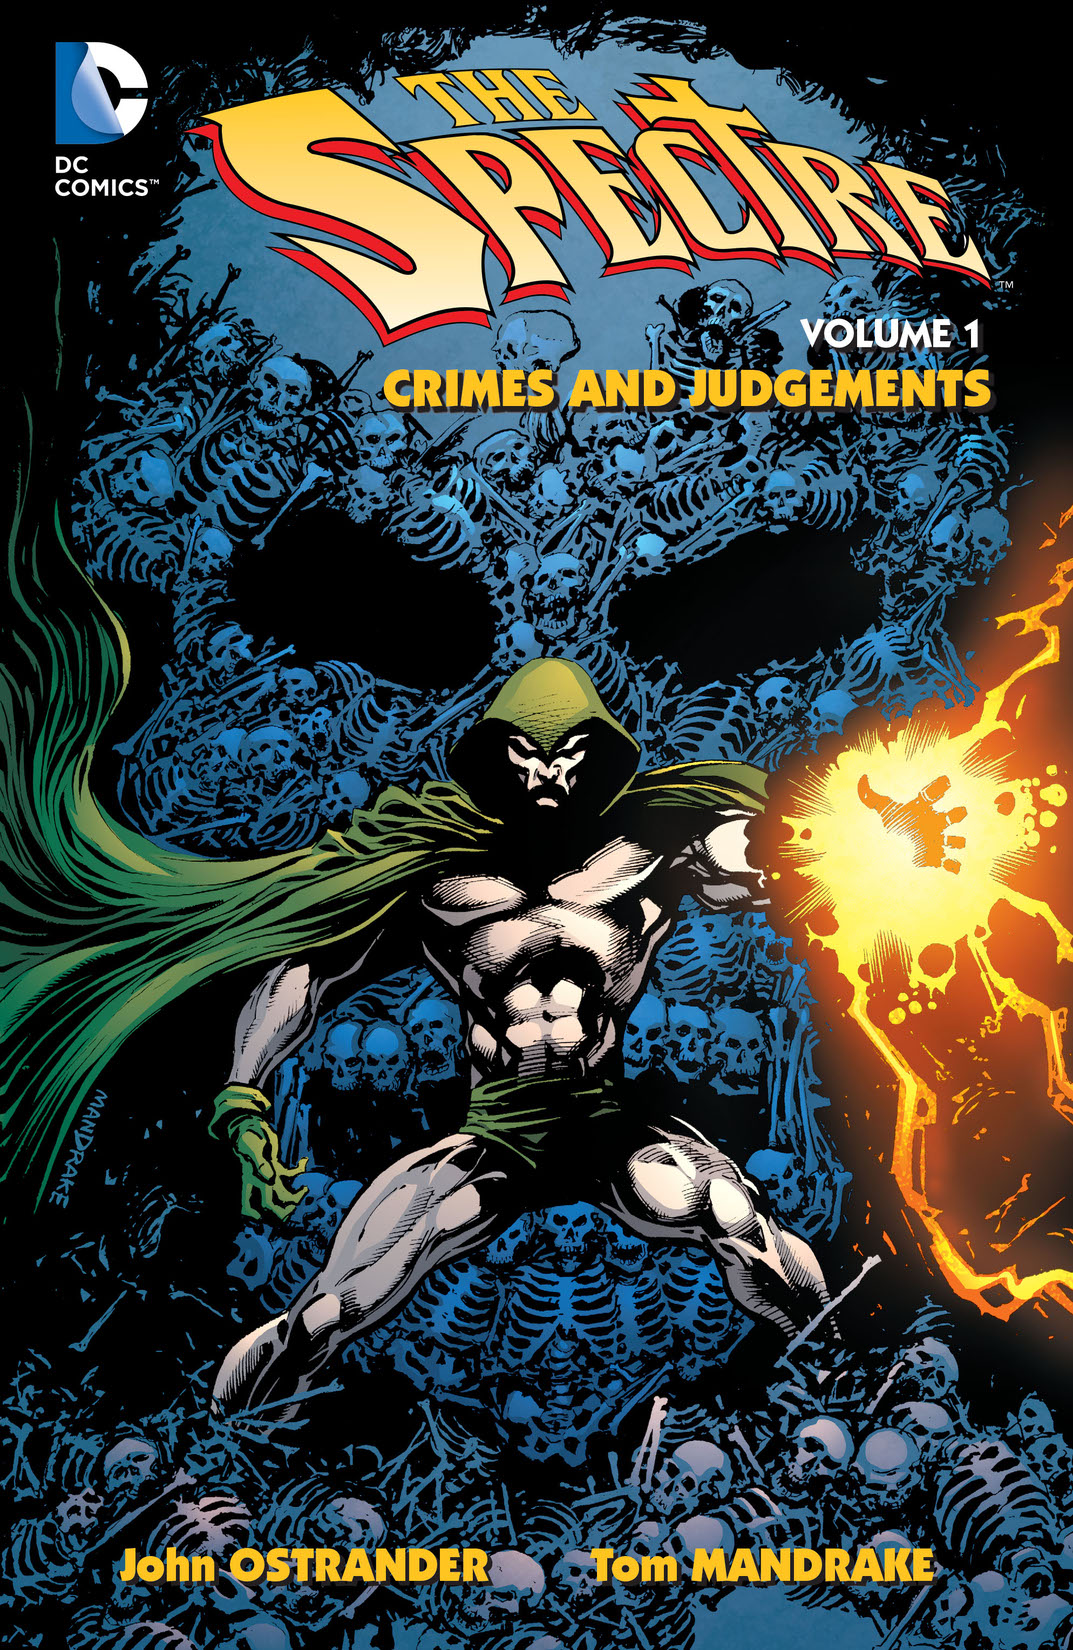 The Spectre Vol. 1: Crimes and Judgments preview images